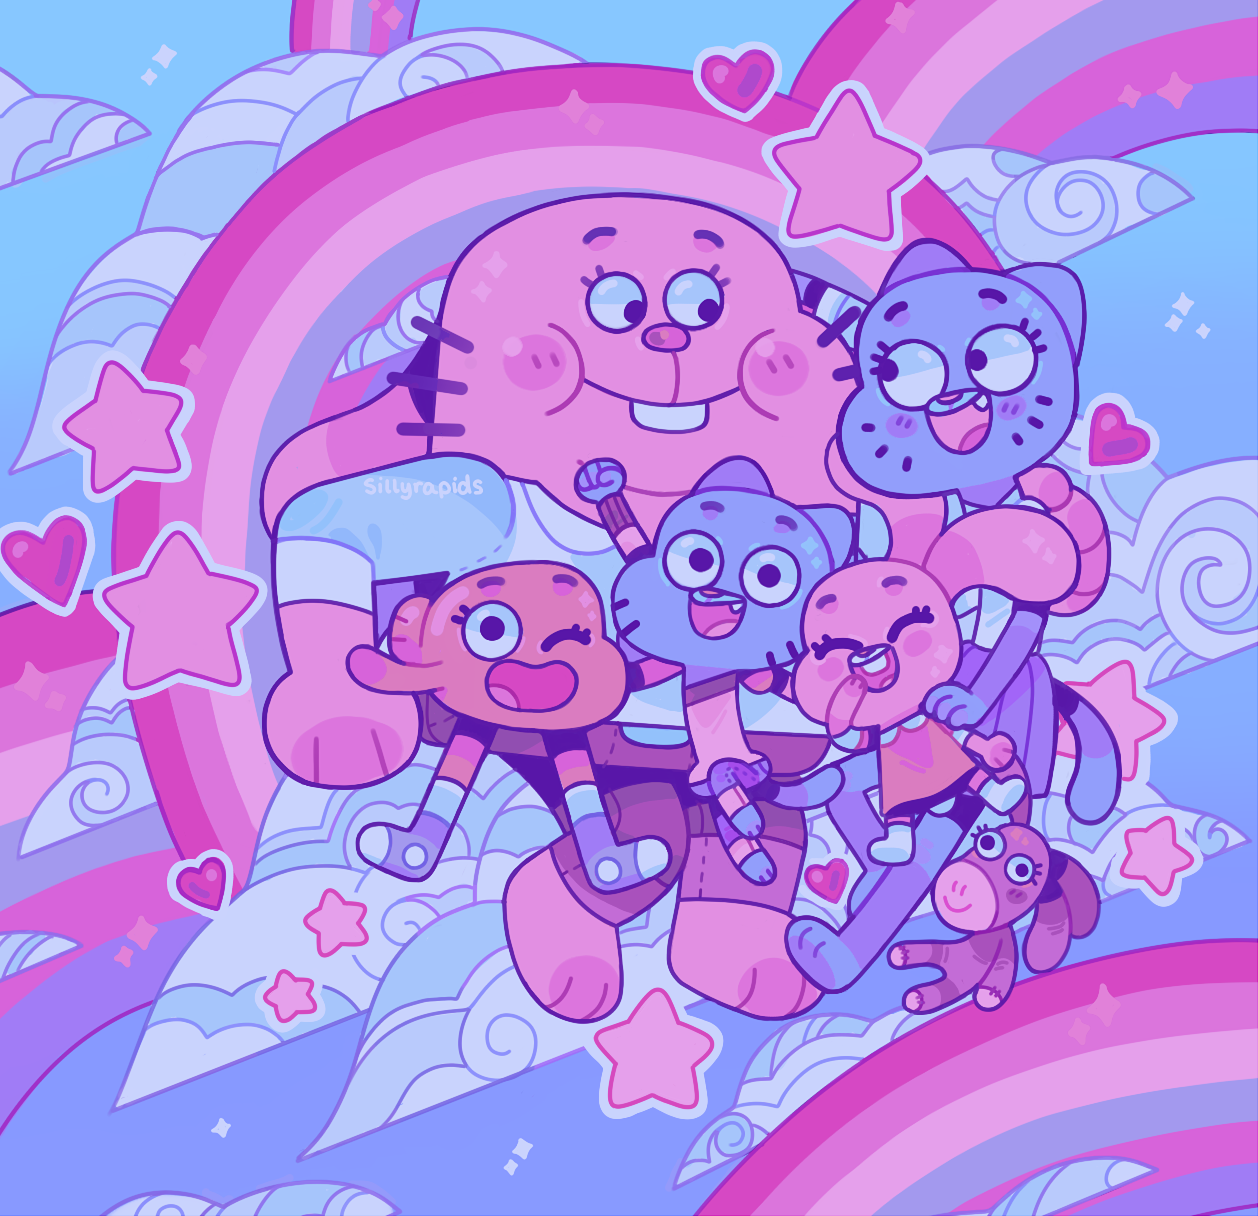 sillyrapids: “ “the inquisition'' finally aired on american tv last night, so i suppose this is fitting t. The amazing world of gumball, World of gumball, Gumball